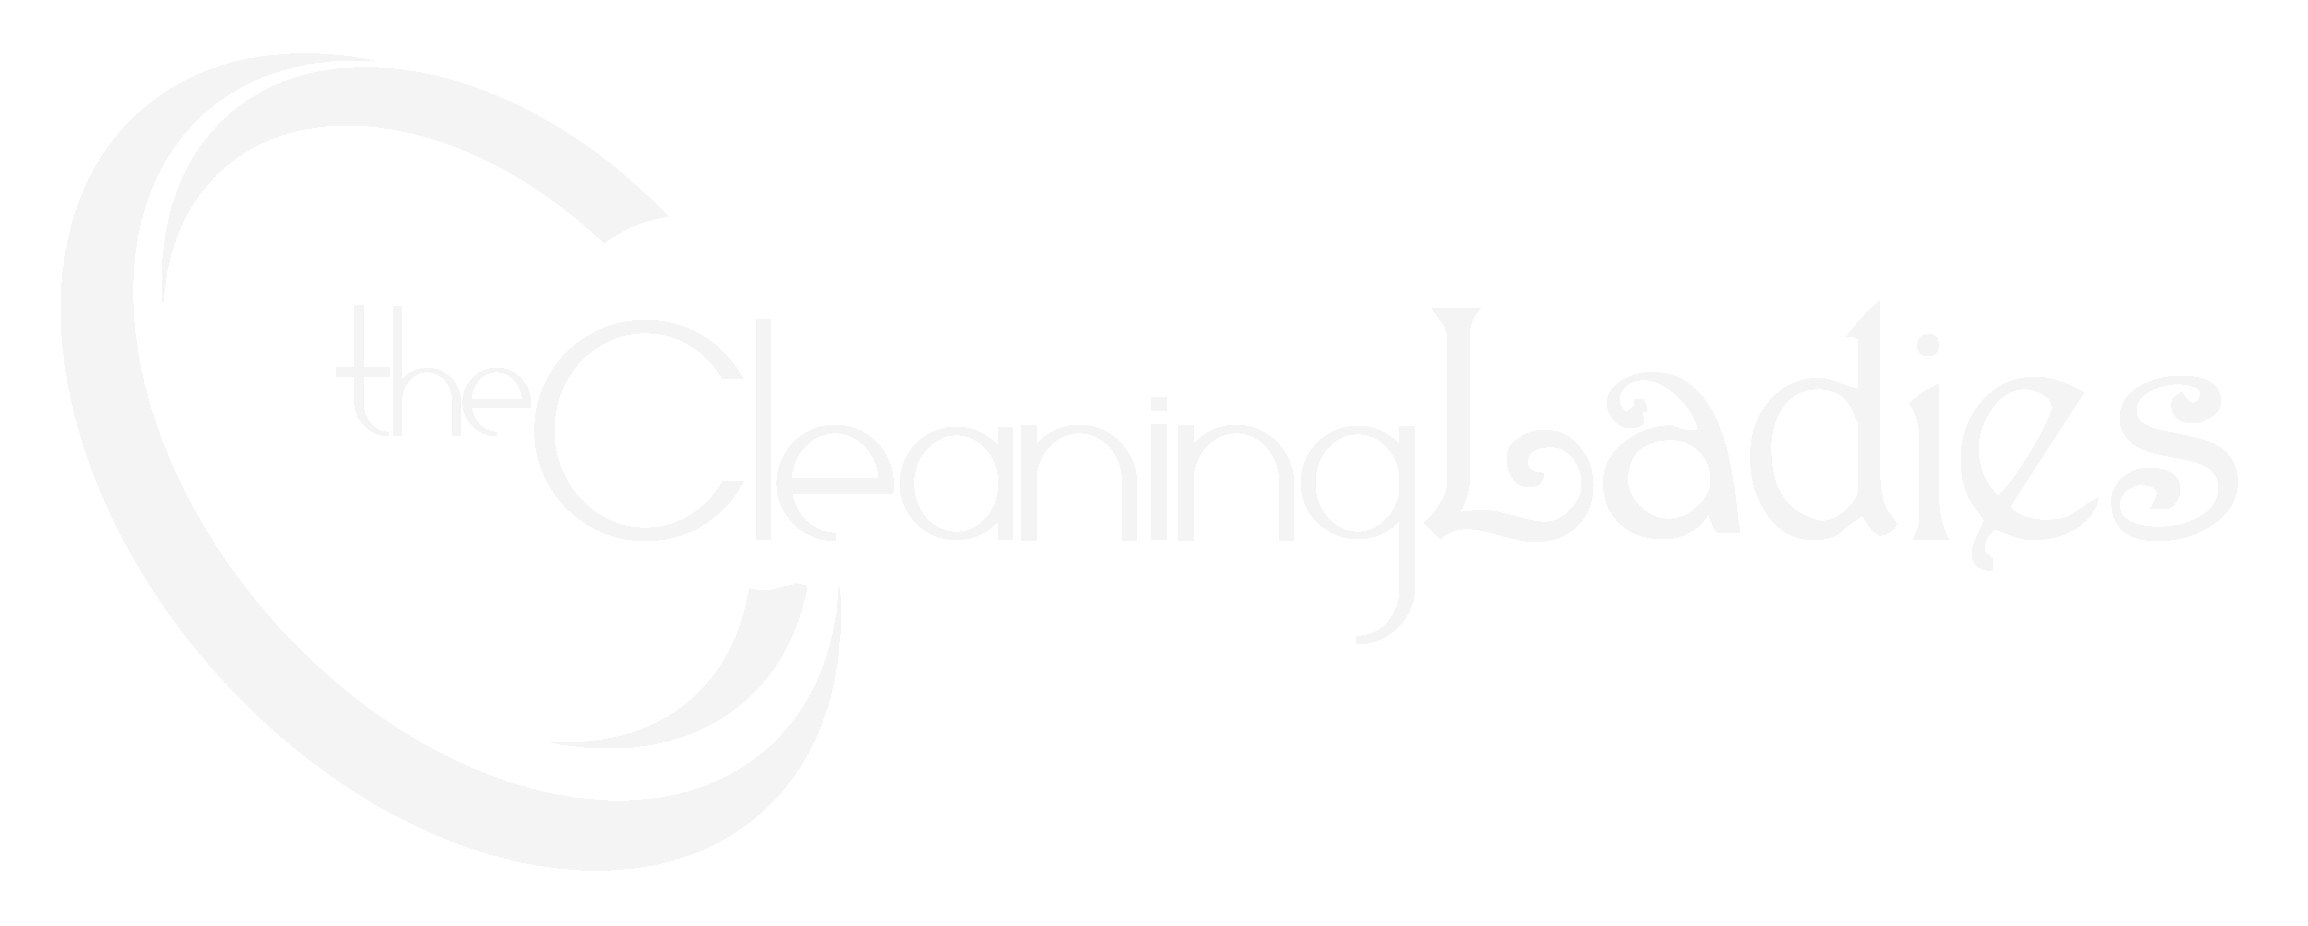 The Cleaning Ladies white logo